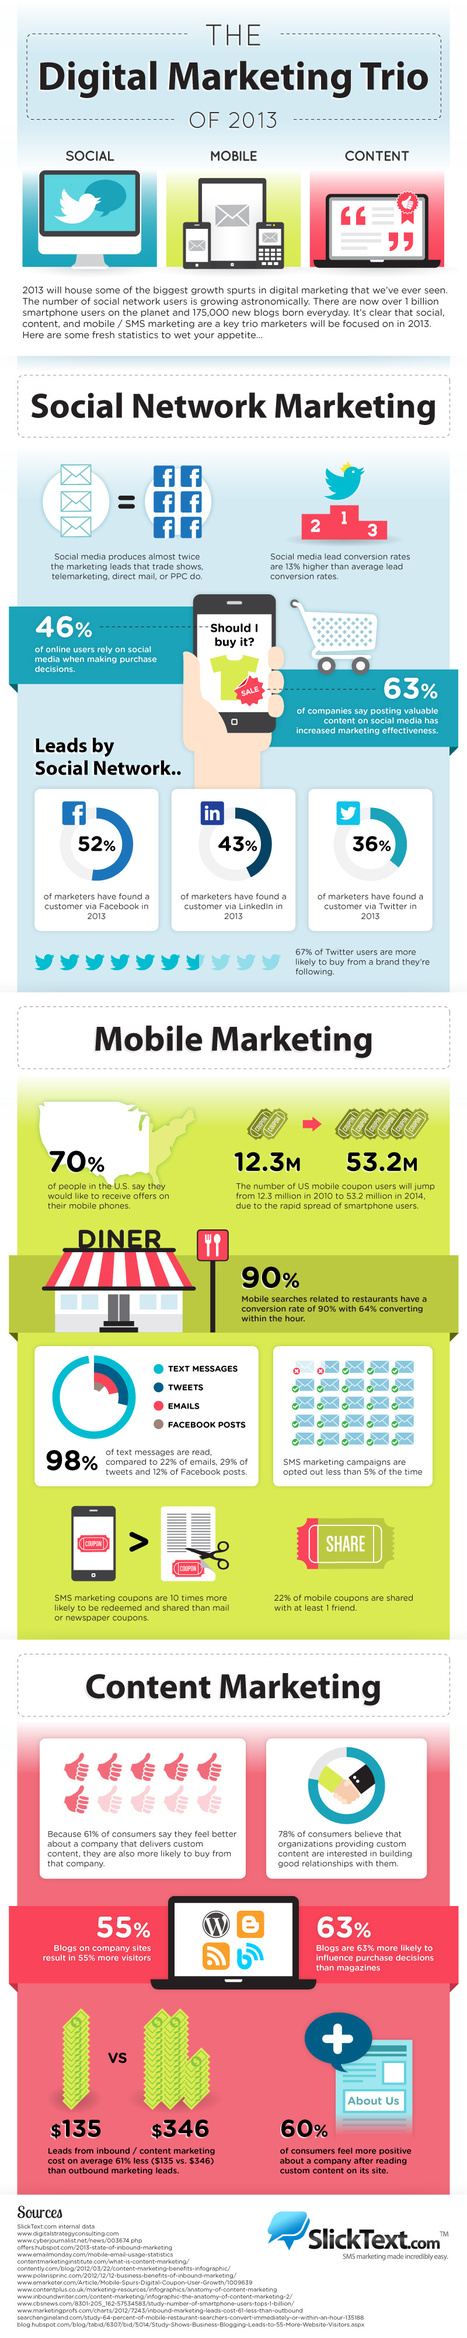 The Digital Marketing Trio Of 2013 [Infographic] | Design, Science and Technology | Scoop.it